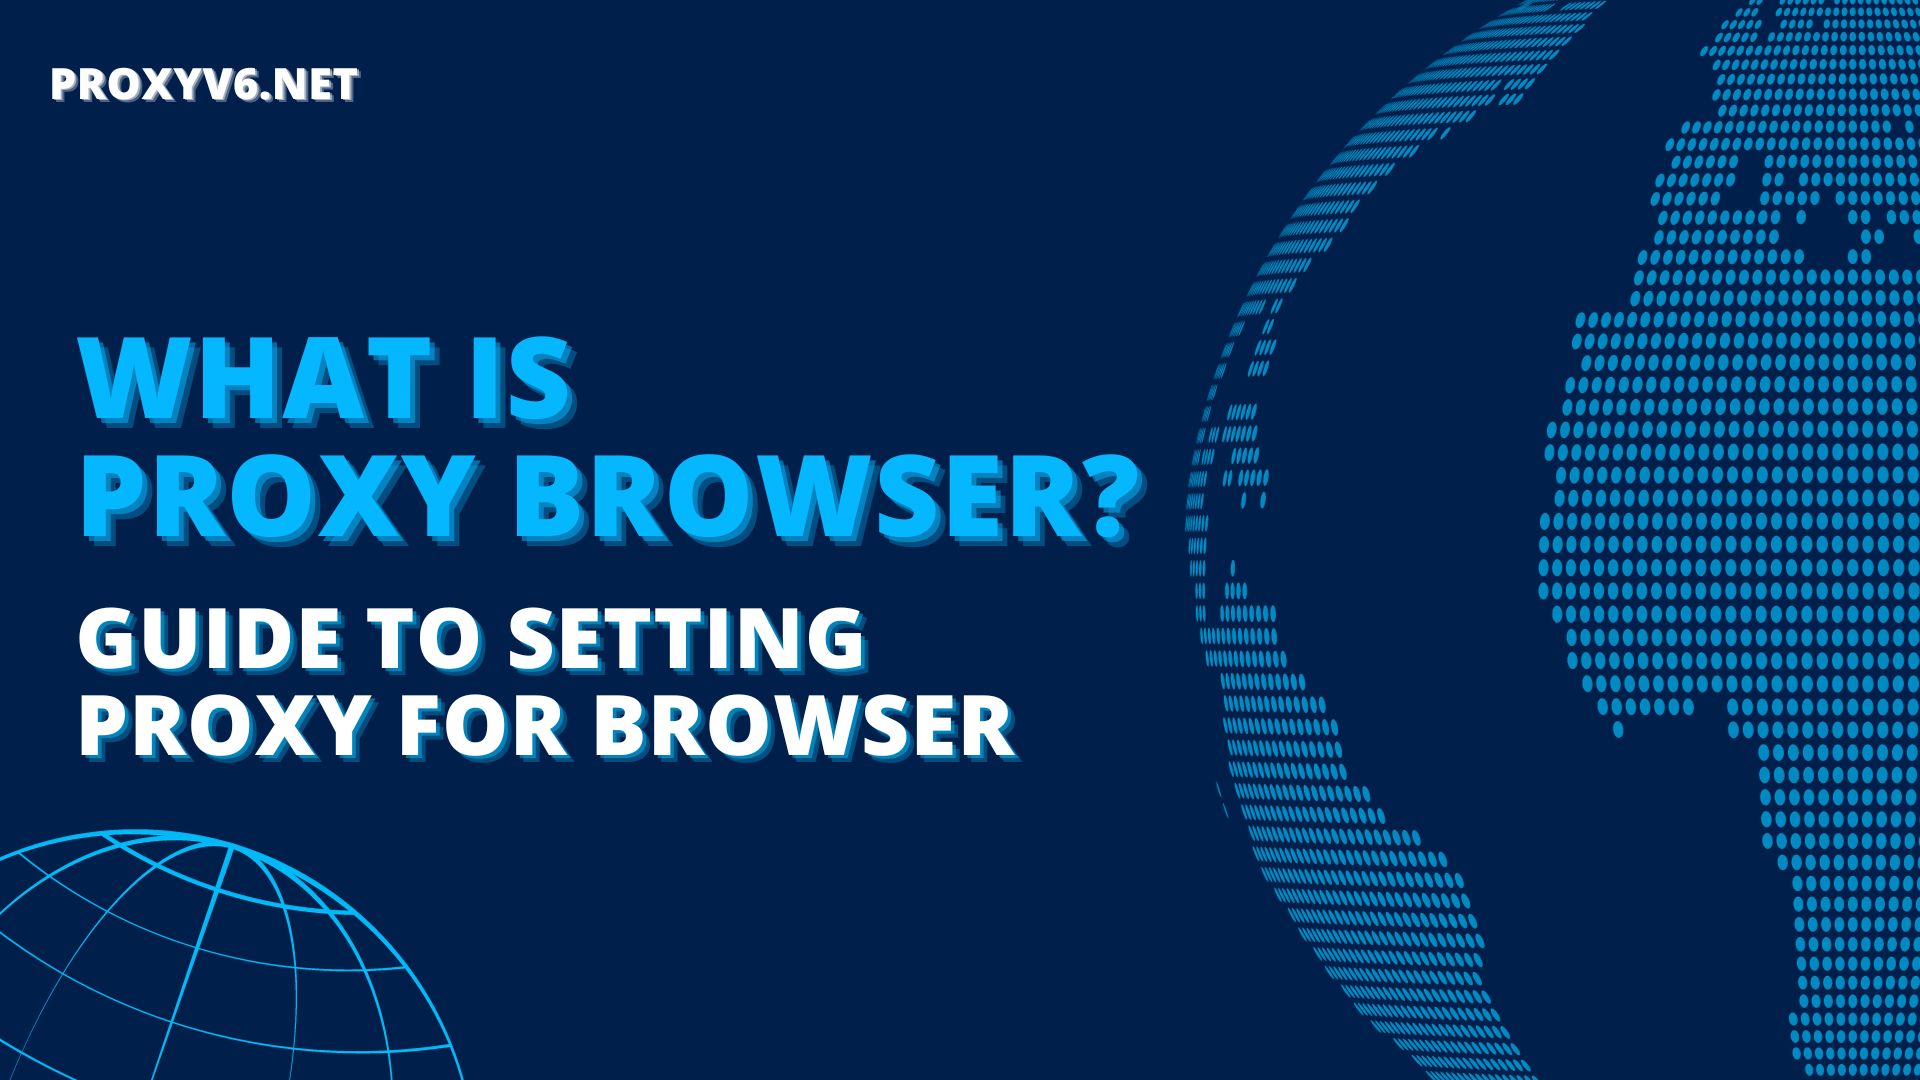 What is Proxy Browser? Guide to setting Proxy for browser